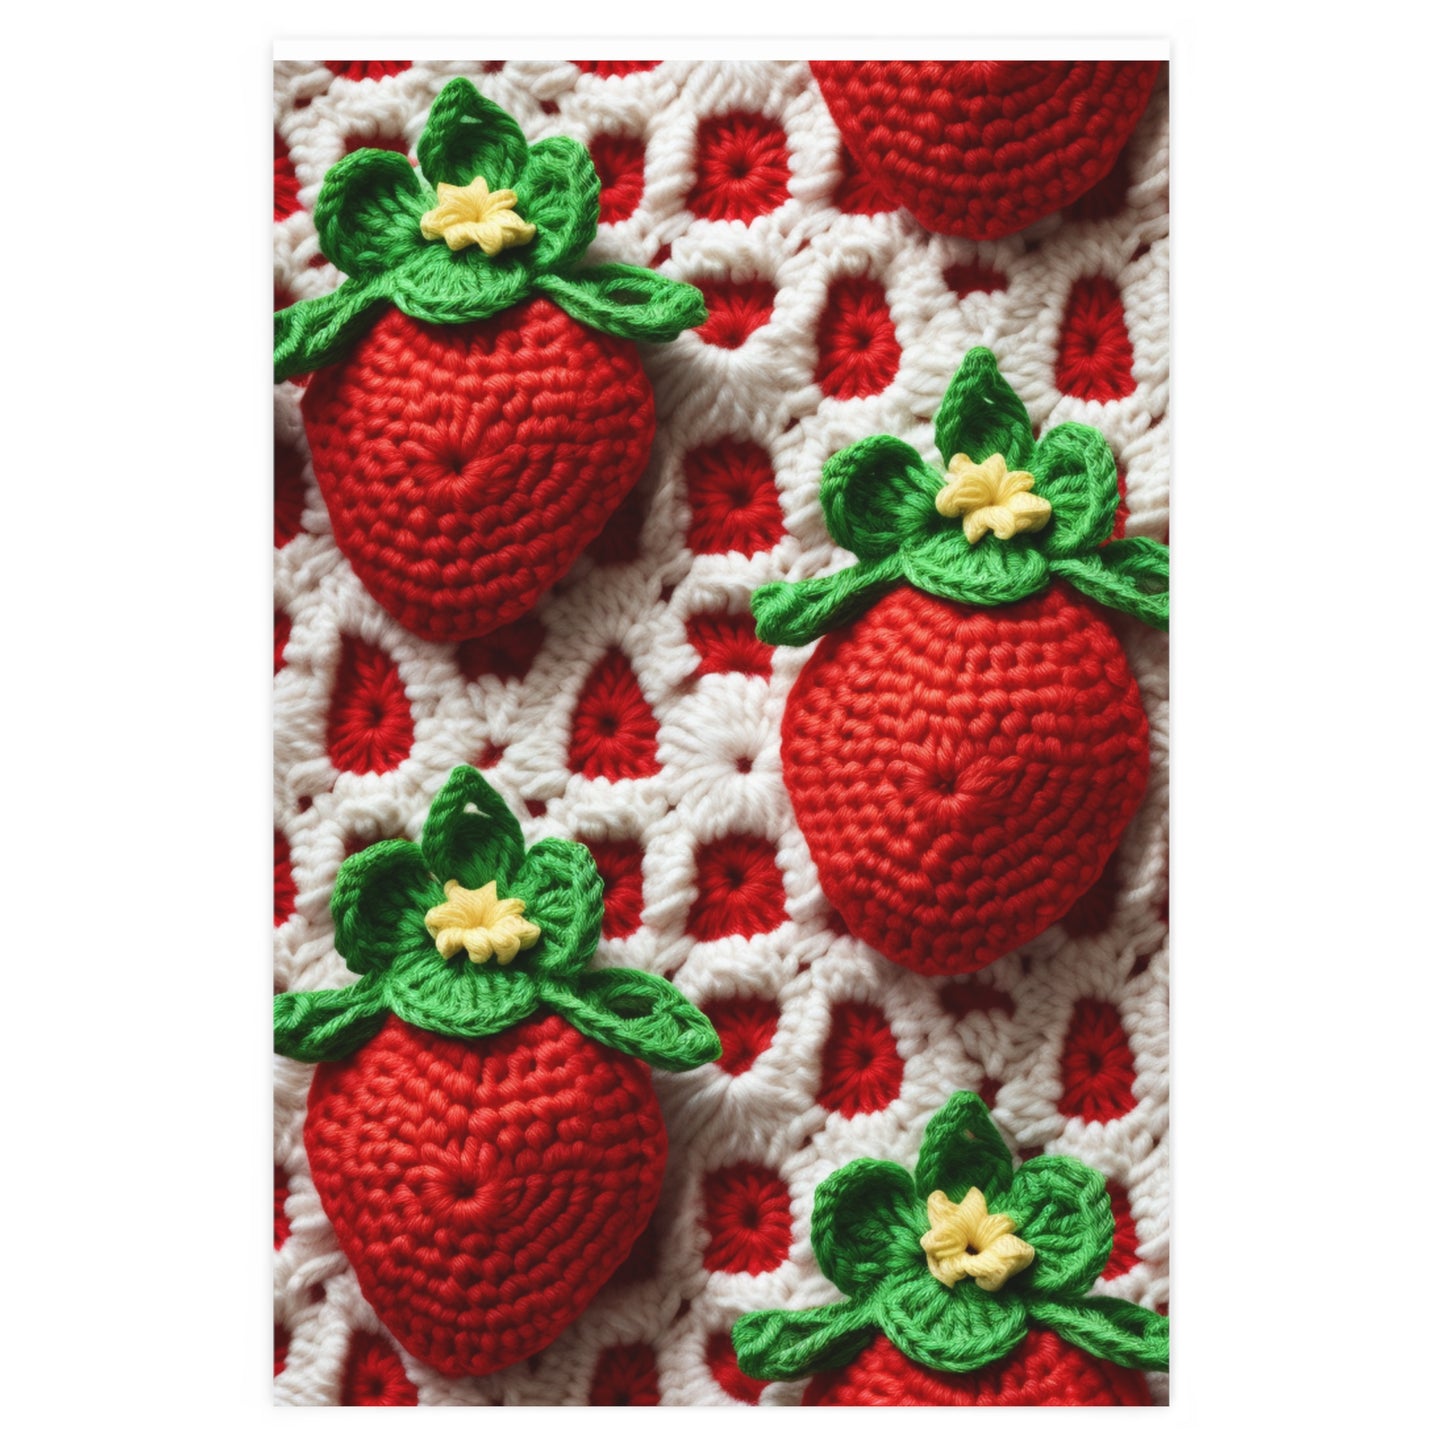 Strawberry Crochet Pattern - Amigurumi Strawberries - Fruit Design for Home and Gifts - Wrapping Paper